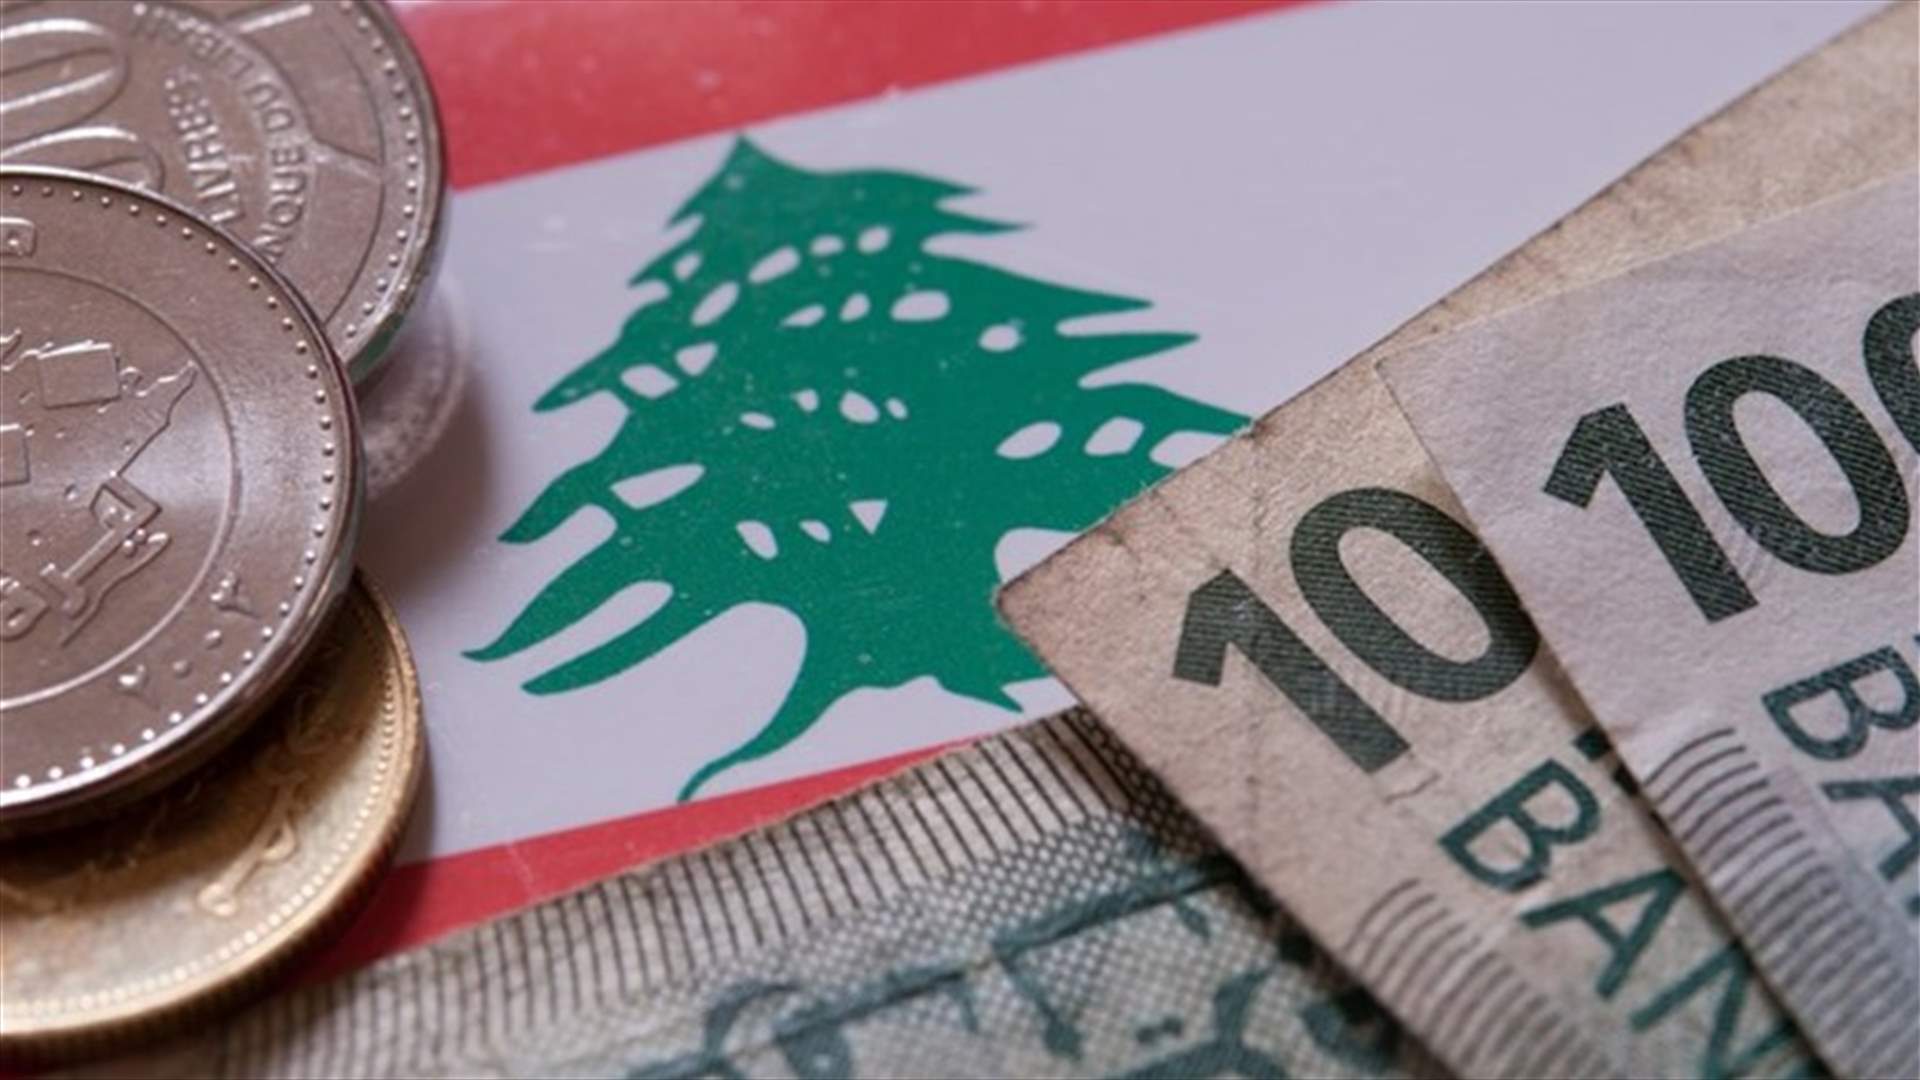 As Lebanon&#39;s economy unravels, dollar bills and connections pay off